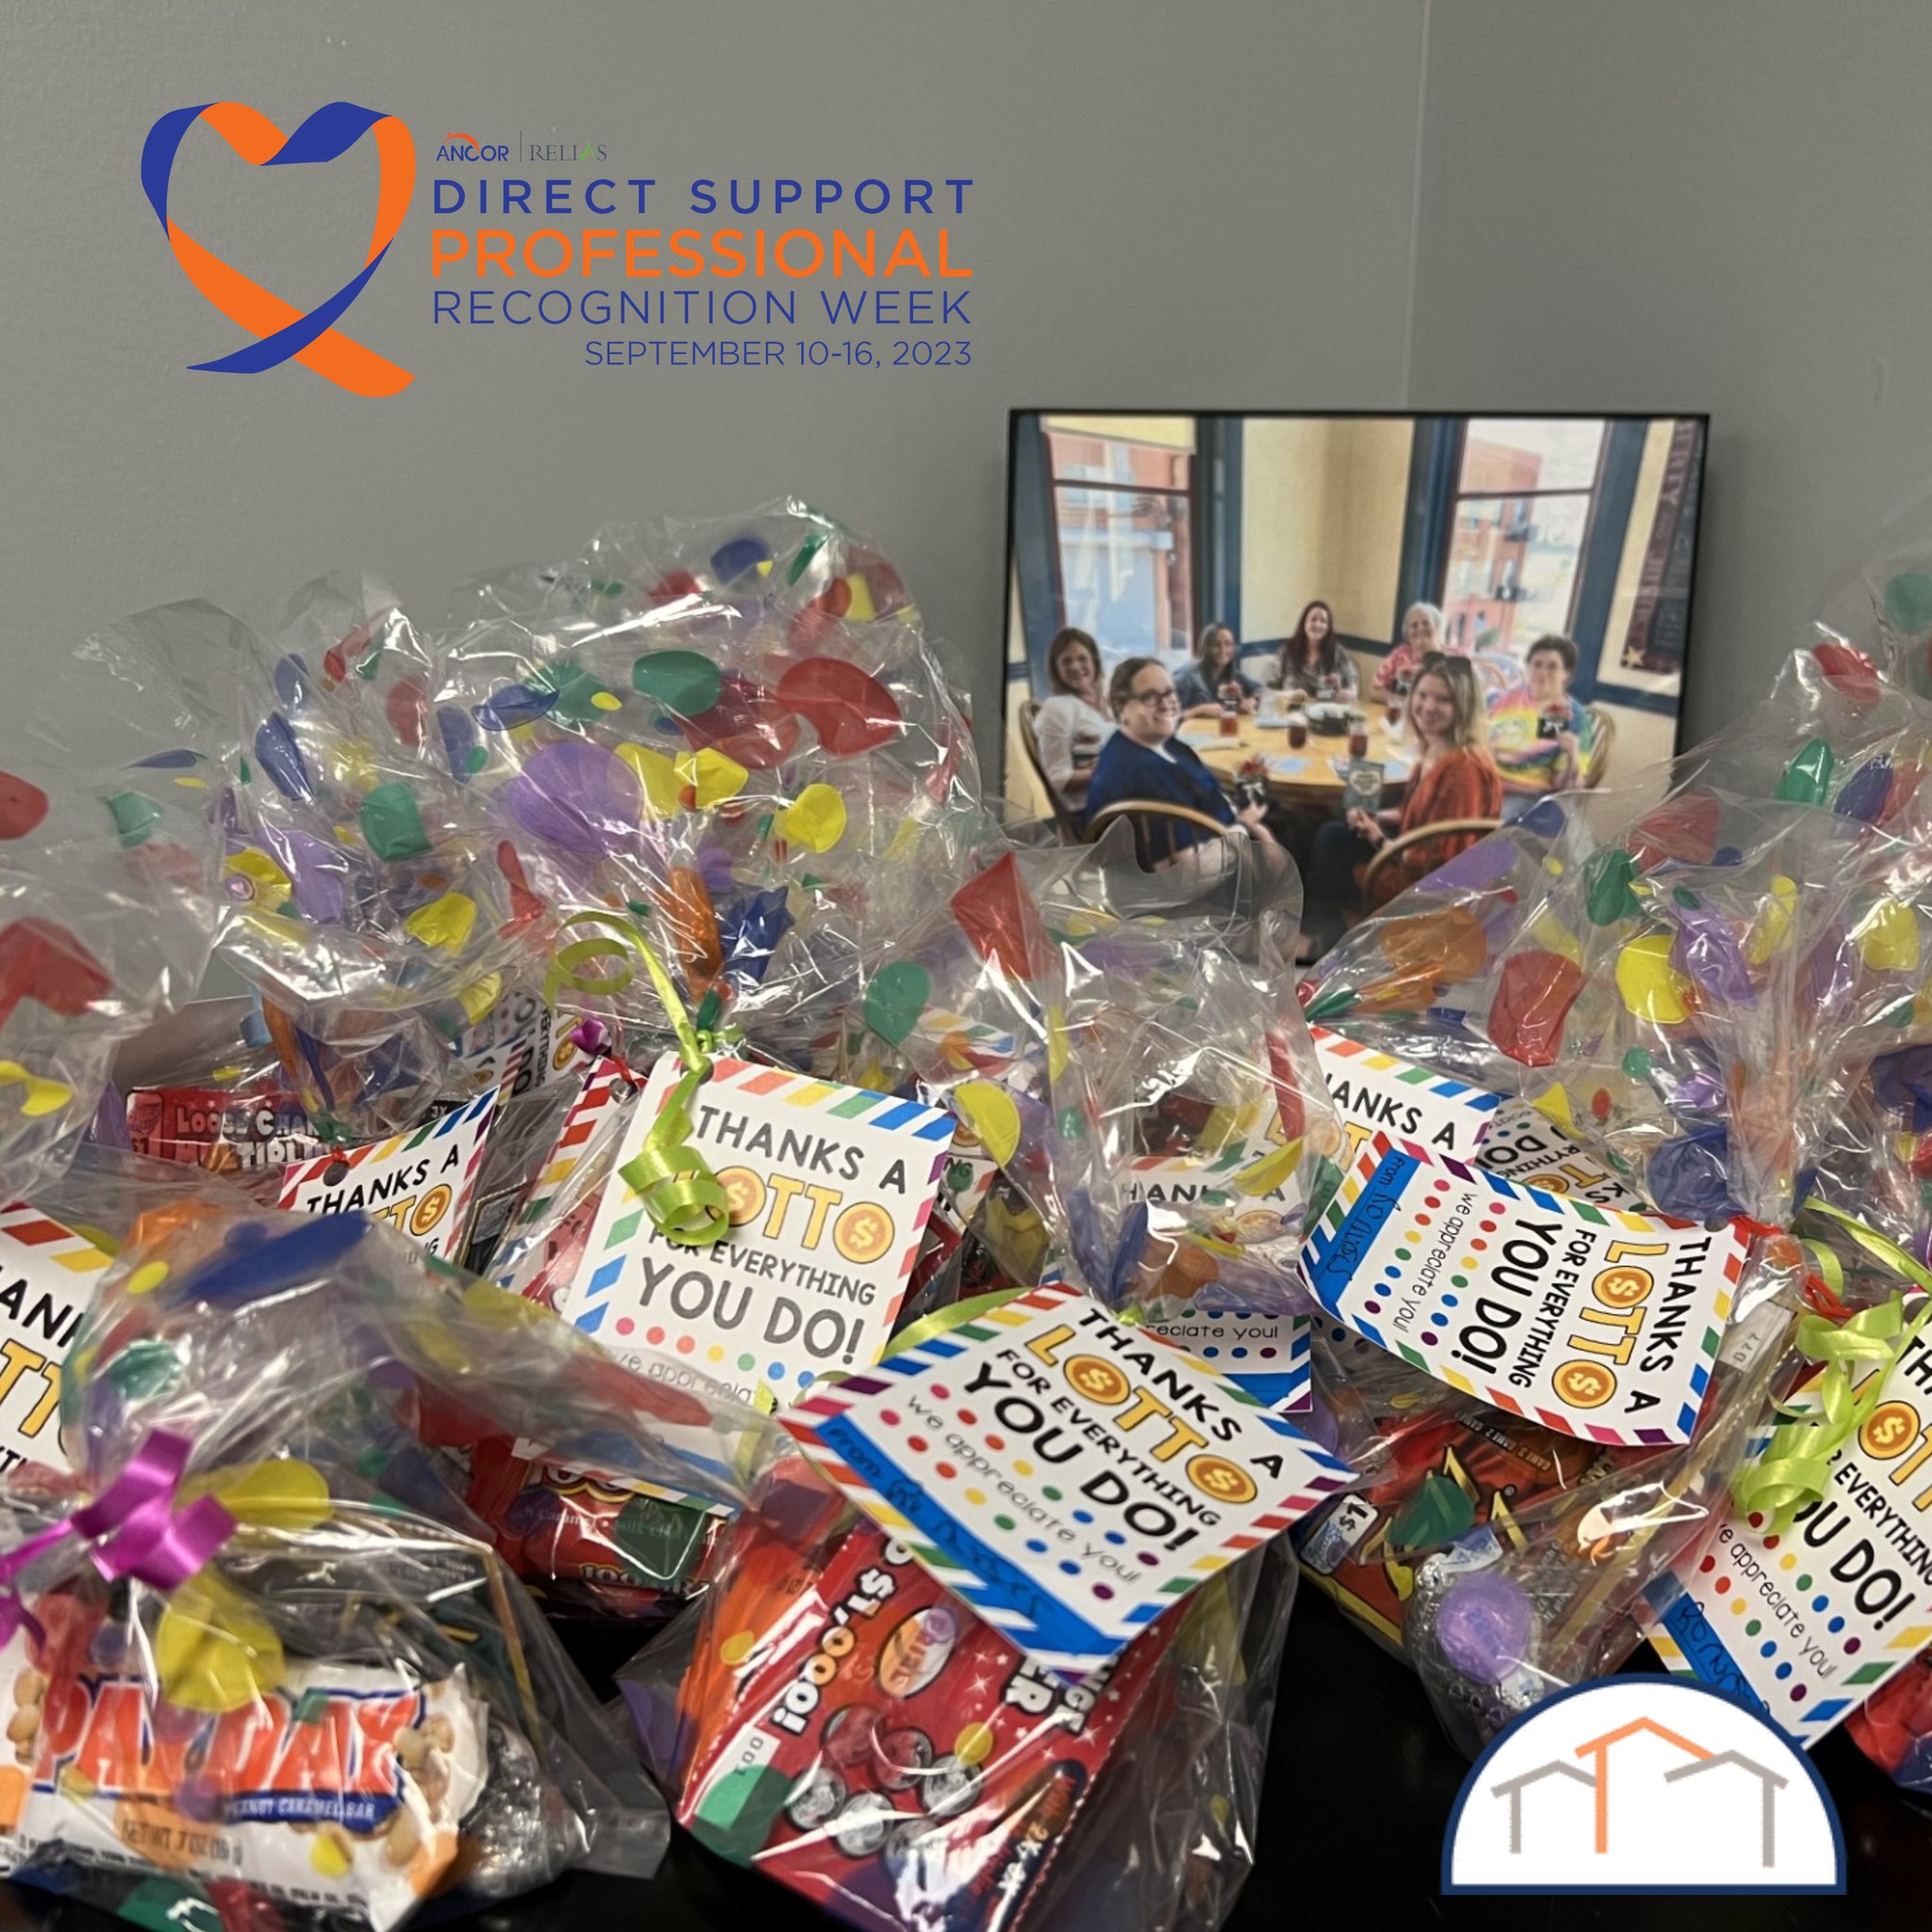 Celebratory gift bags for DSPs